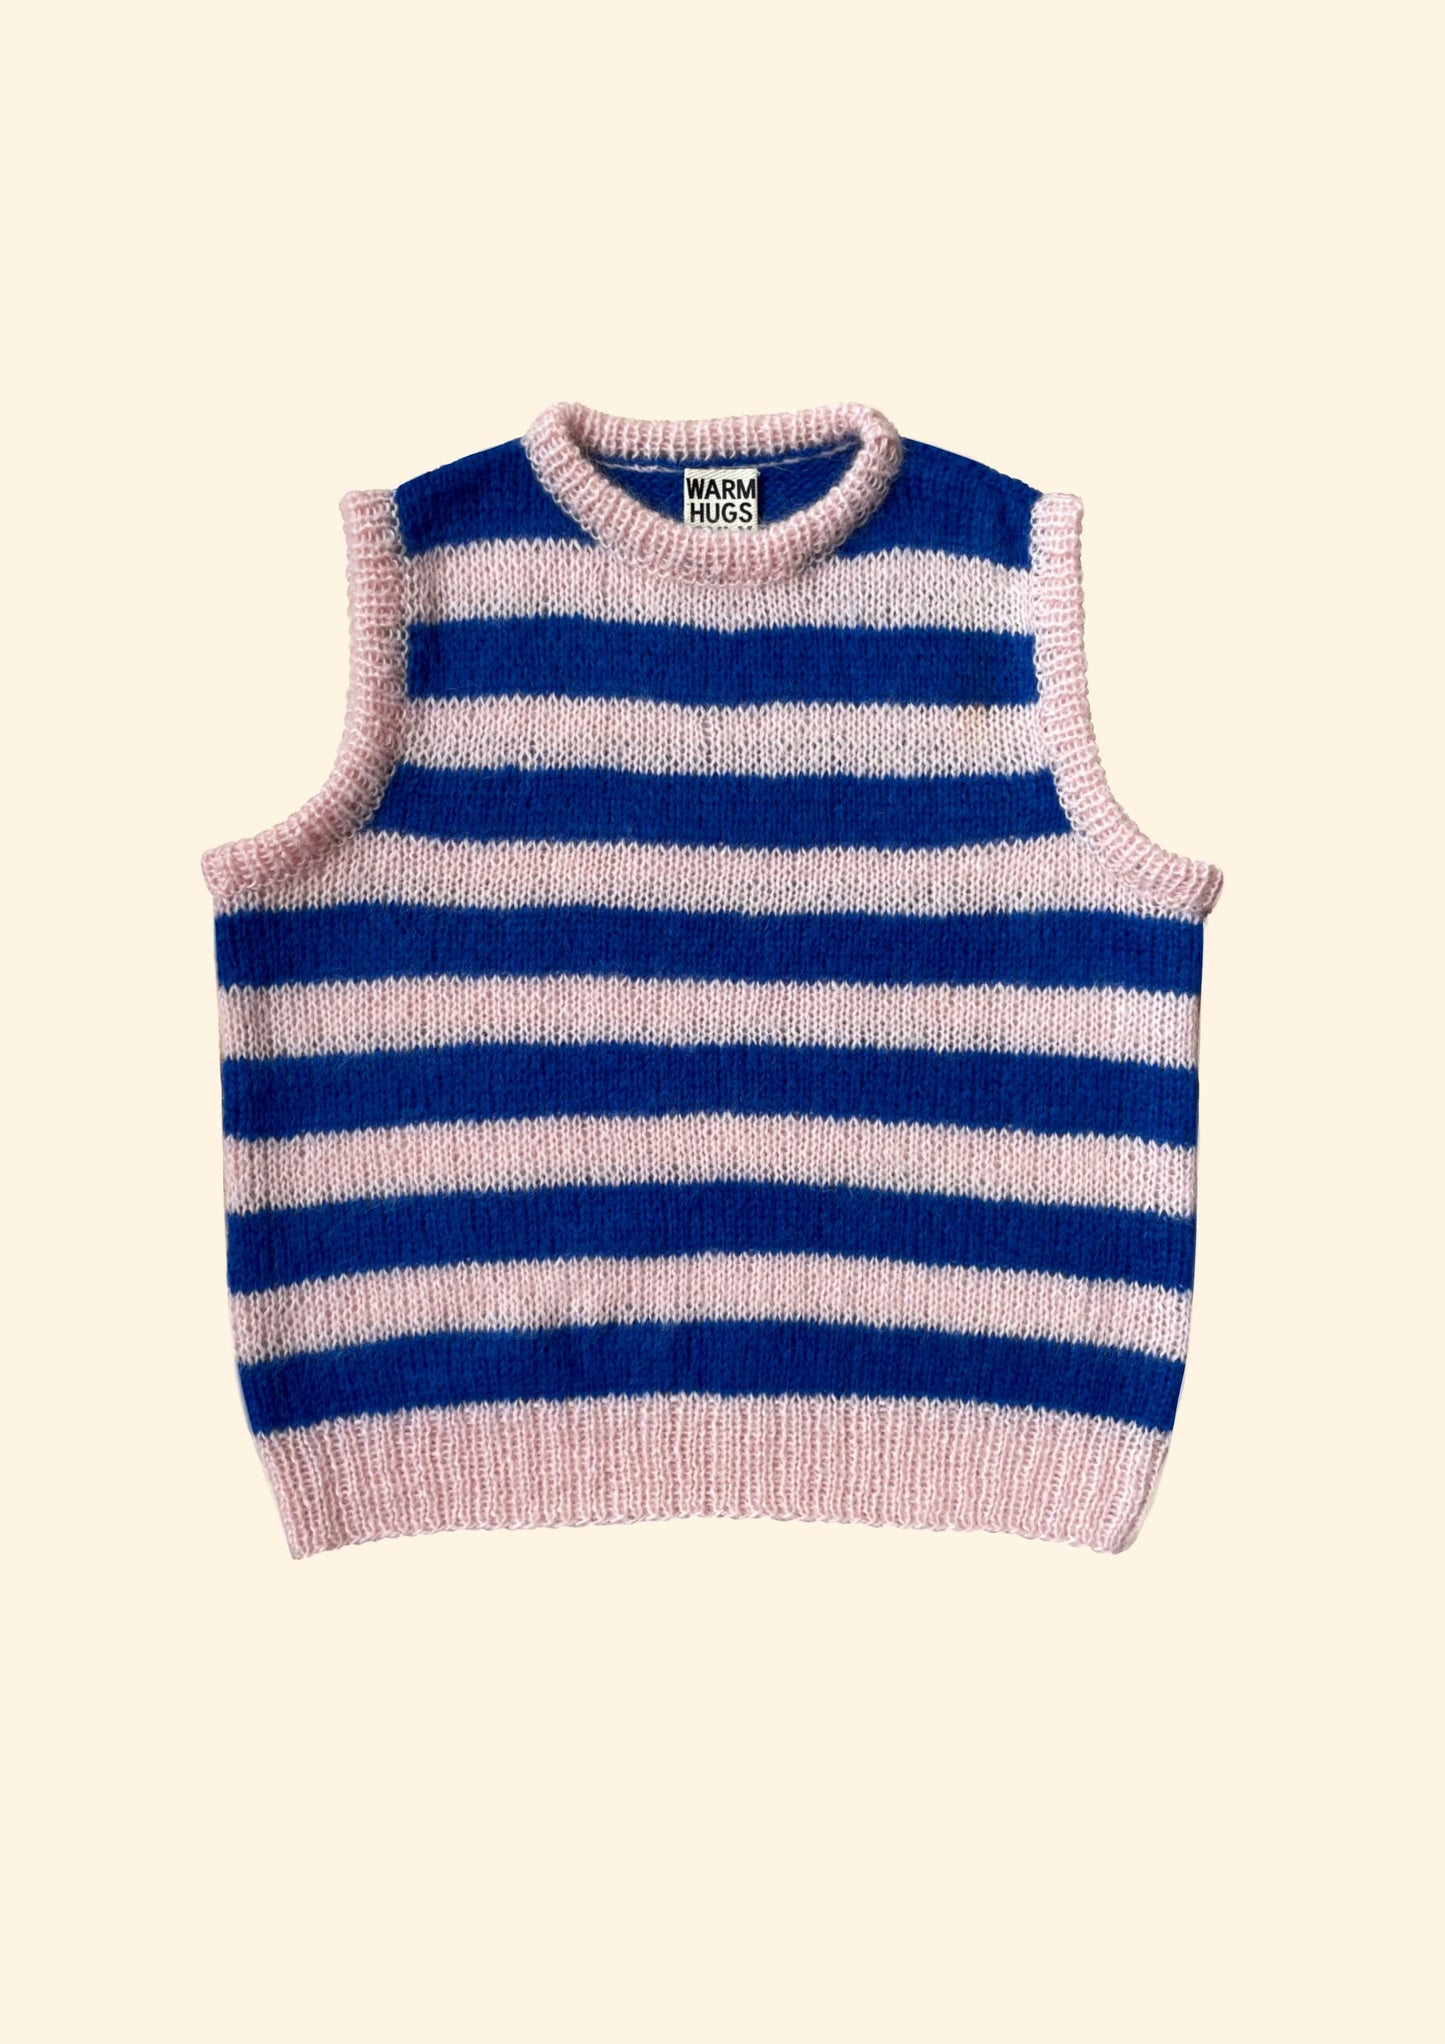 Hand-knitted Mohair striped vest